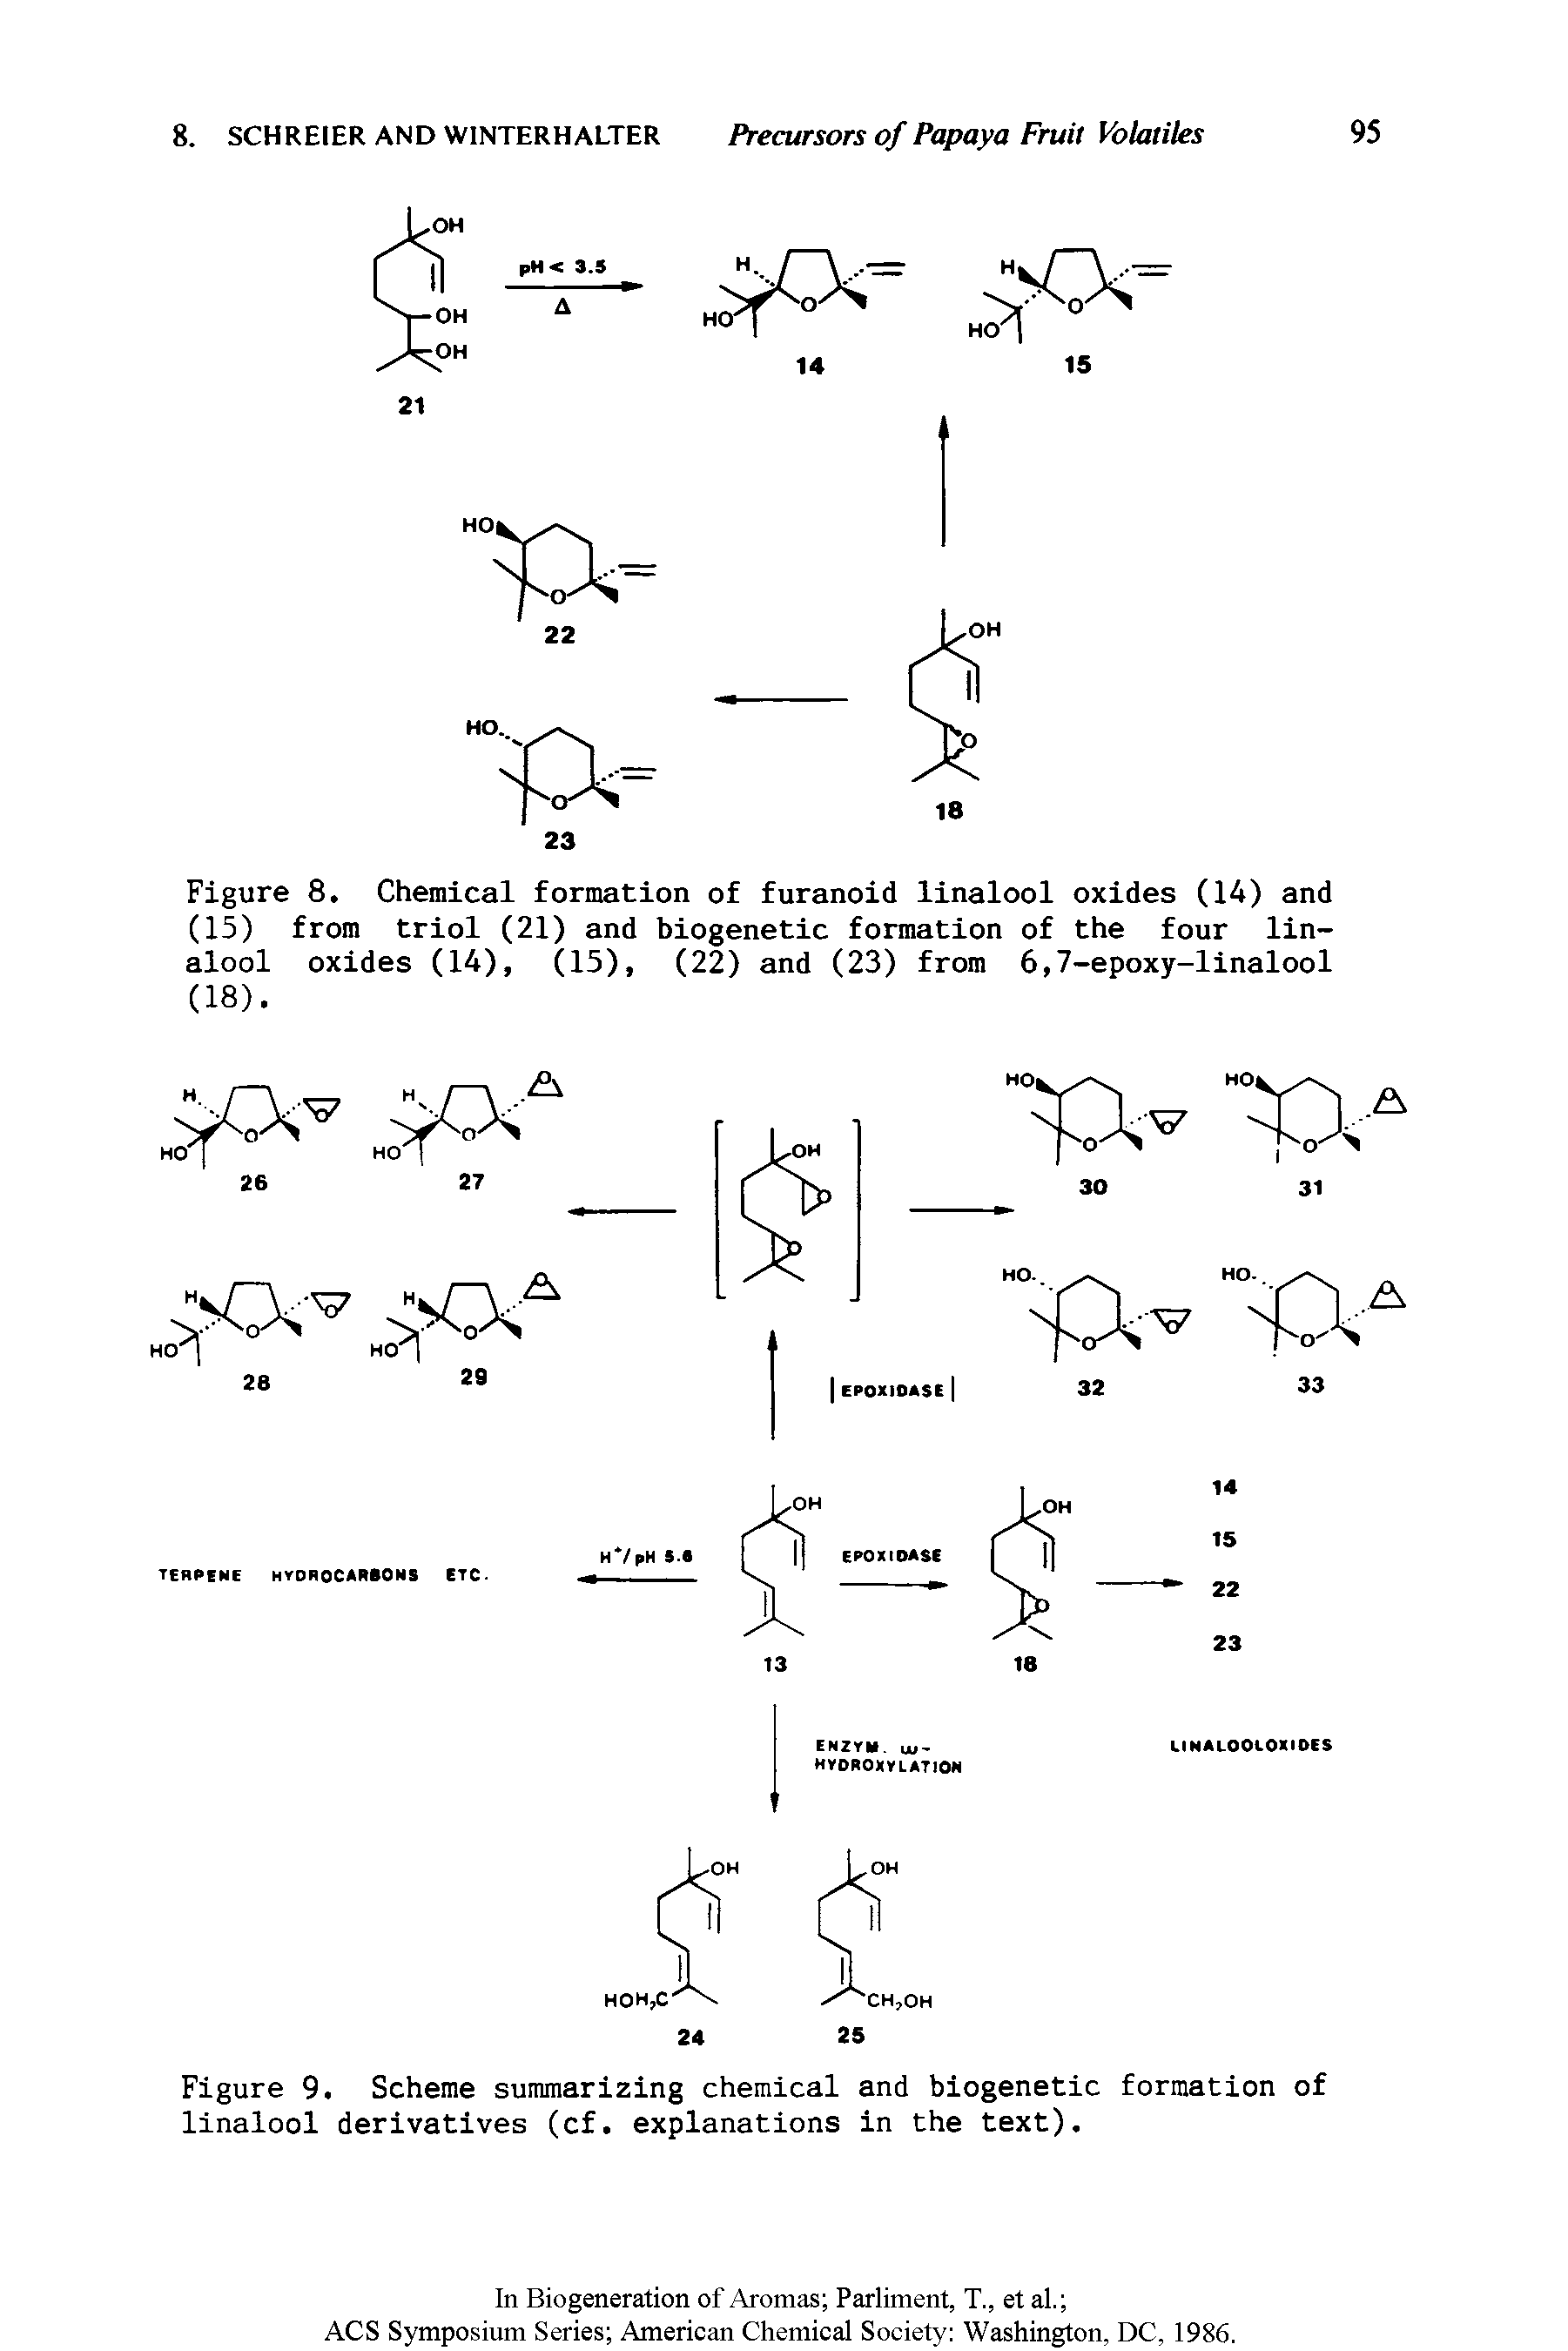 Figure 8. Chemical formation of furanoid linalool oxides (14) and (15) from triol (21) and biogenetic formation of the four linalool oxides (14), (15), (22) and (23) from 6,7-epoxy-linalool (18).